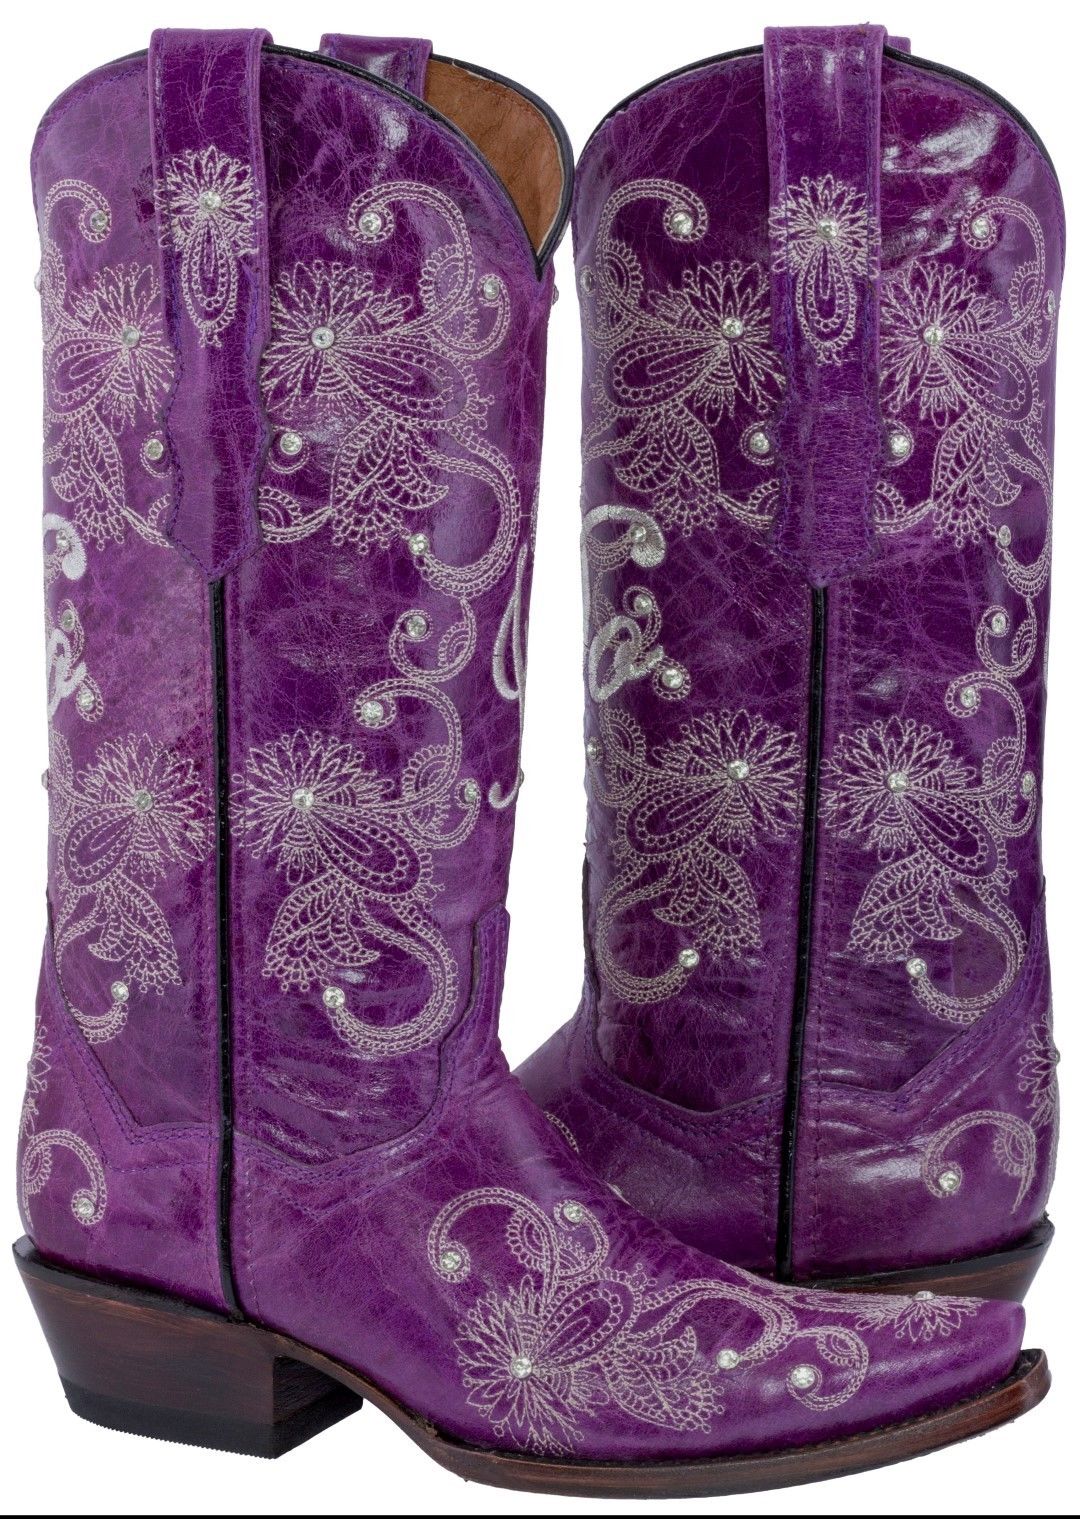 COWGIRL WEDDING BOOTS I Do and Floral 